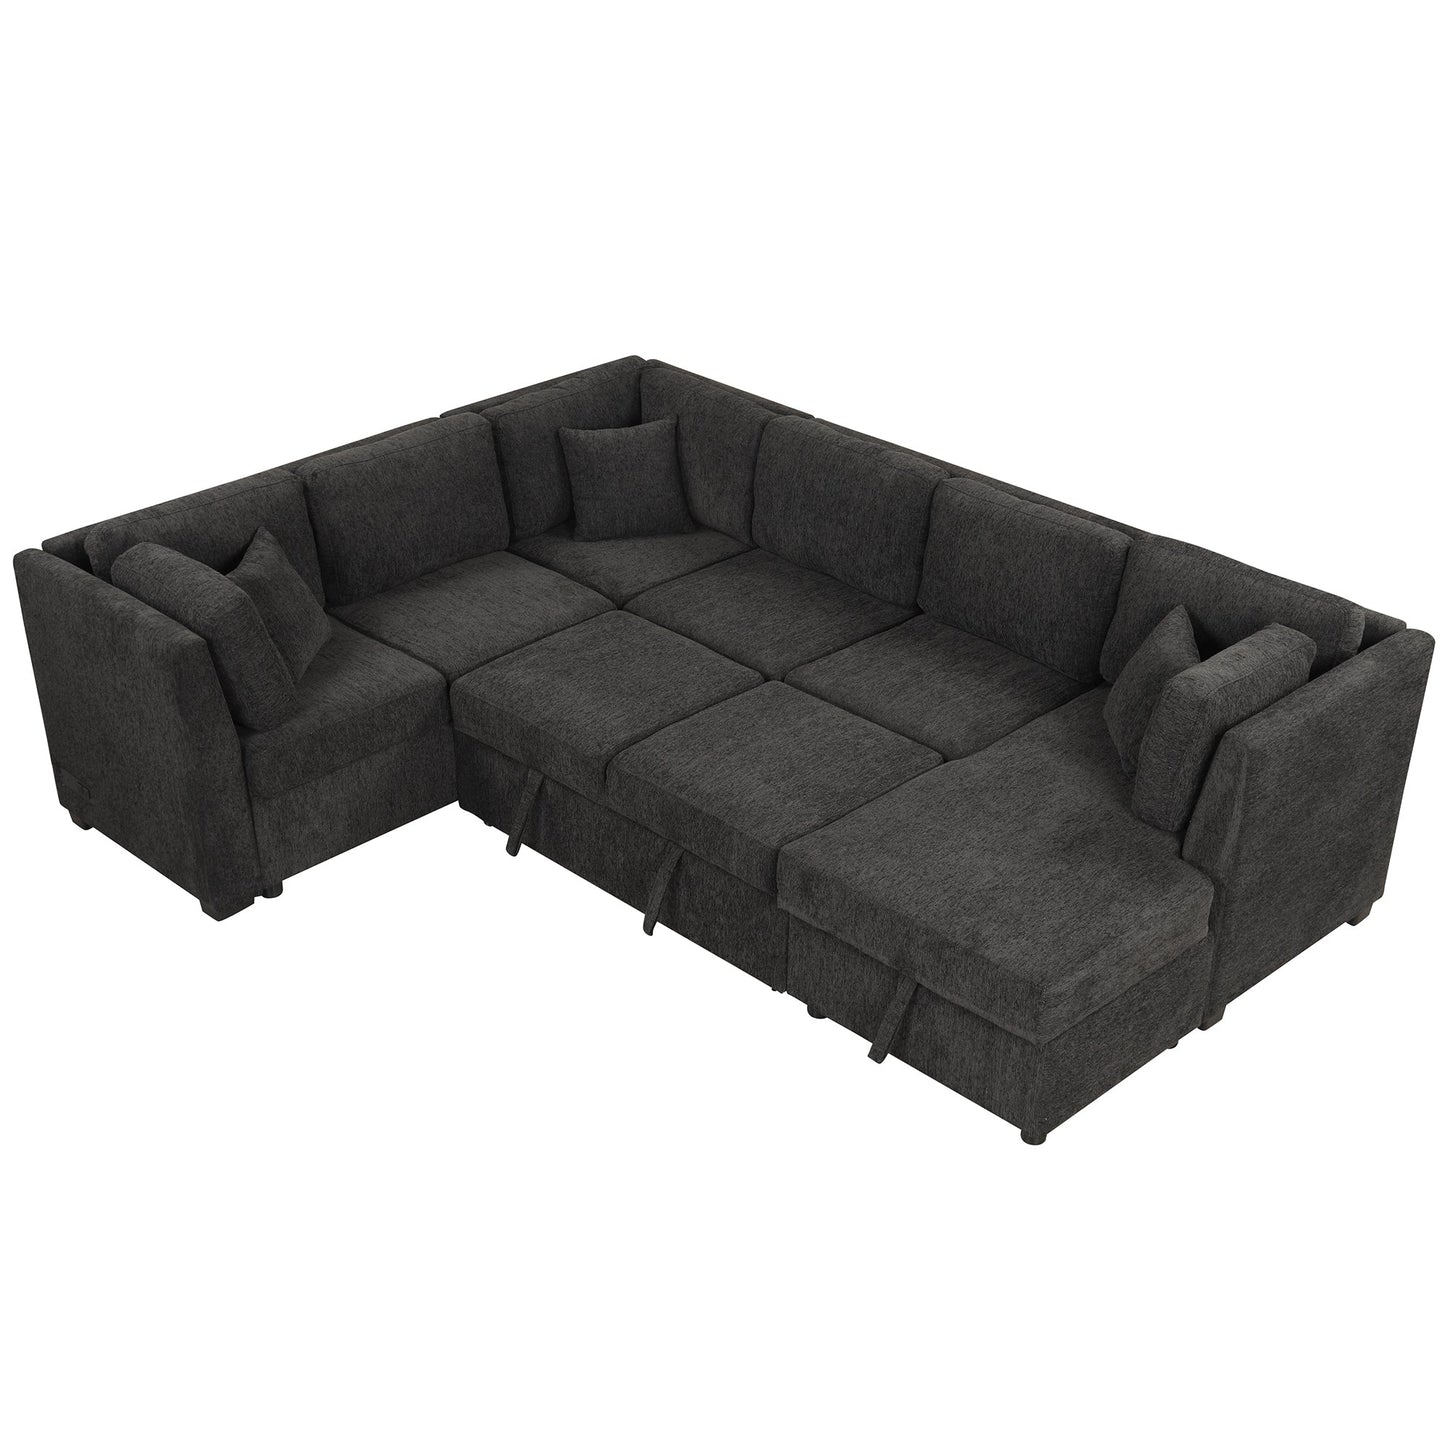 108.6" U-shaped Sectional Sofa Pull out Sofa Bed with Two USB Ports,